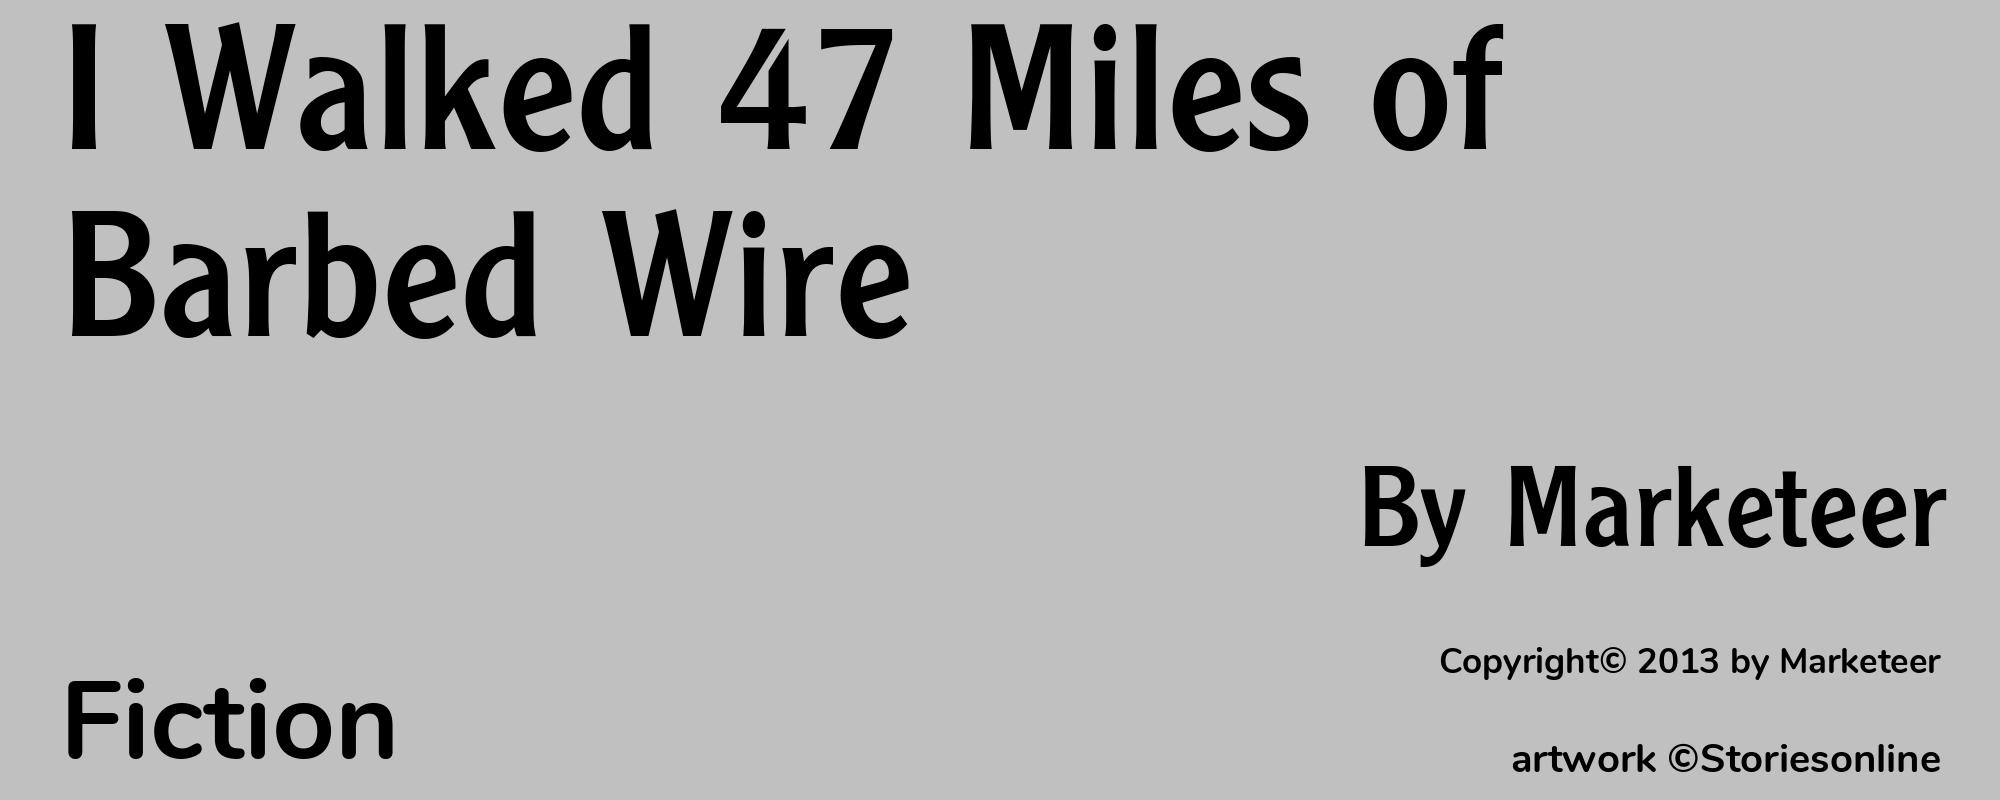 I Walked 47 Miles of Barbed Wire - Cover